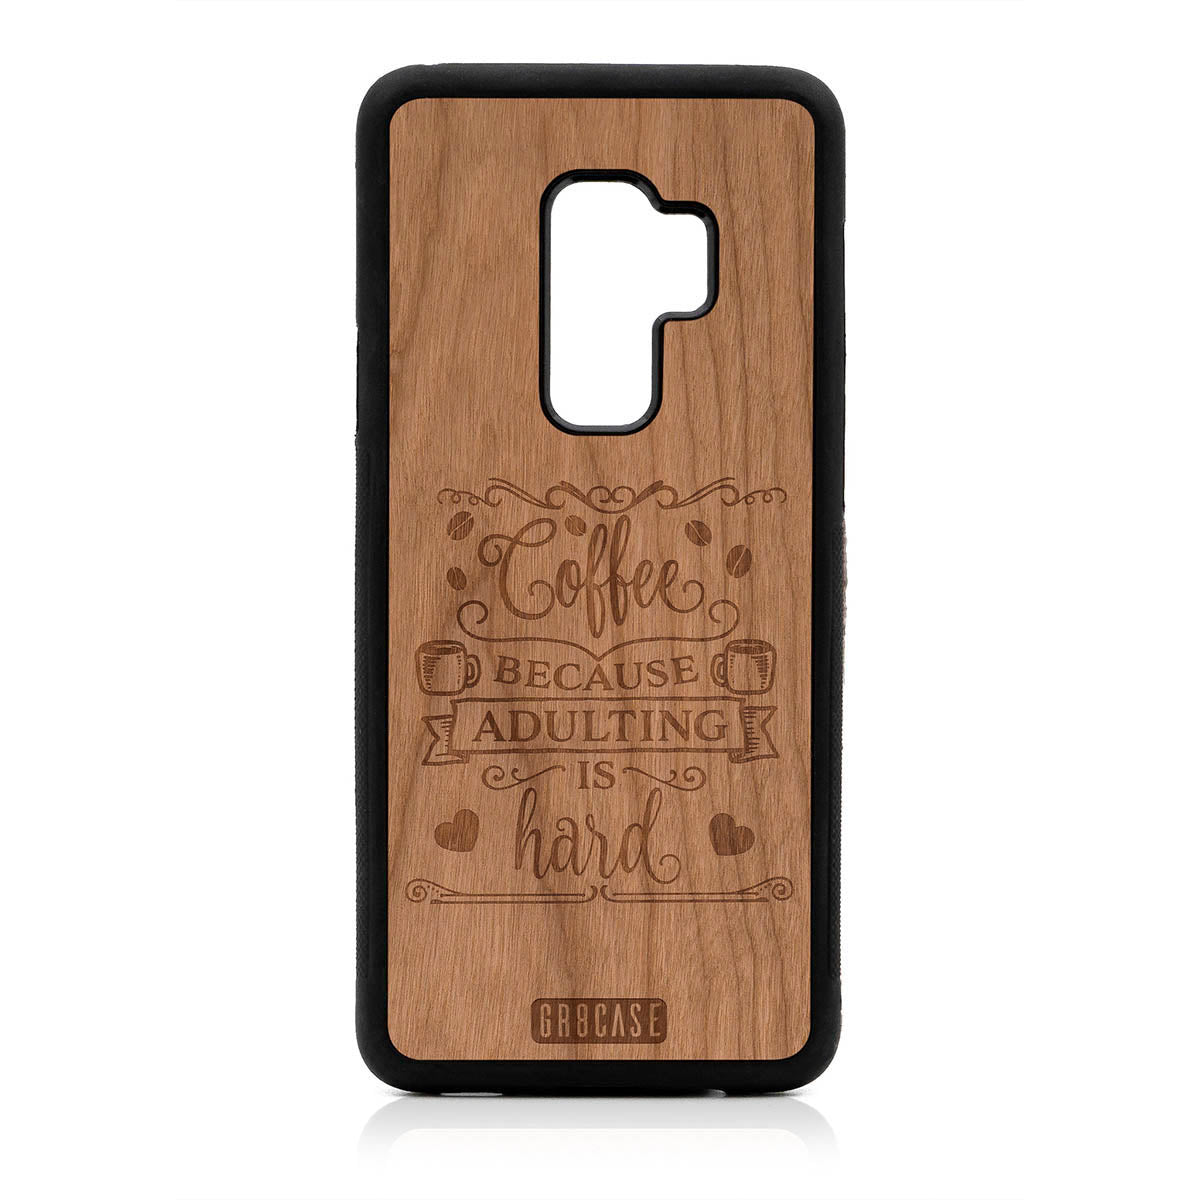 Coffee Because Adulting Is Hard Design Wood Case For Samsung Galaxy S9 Plus